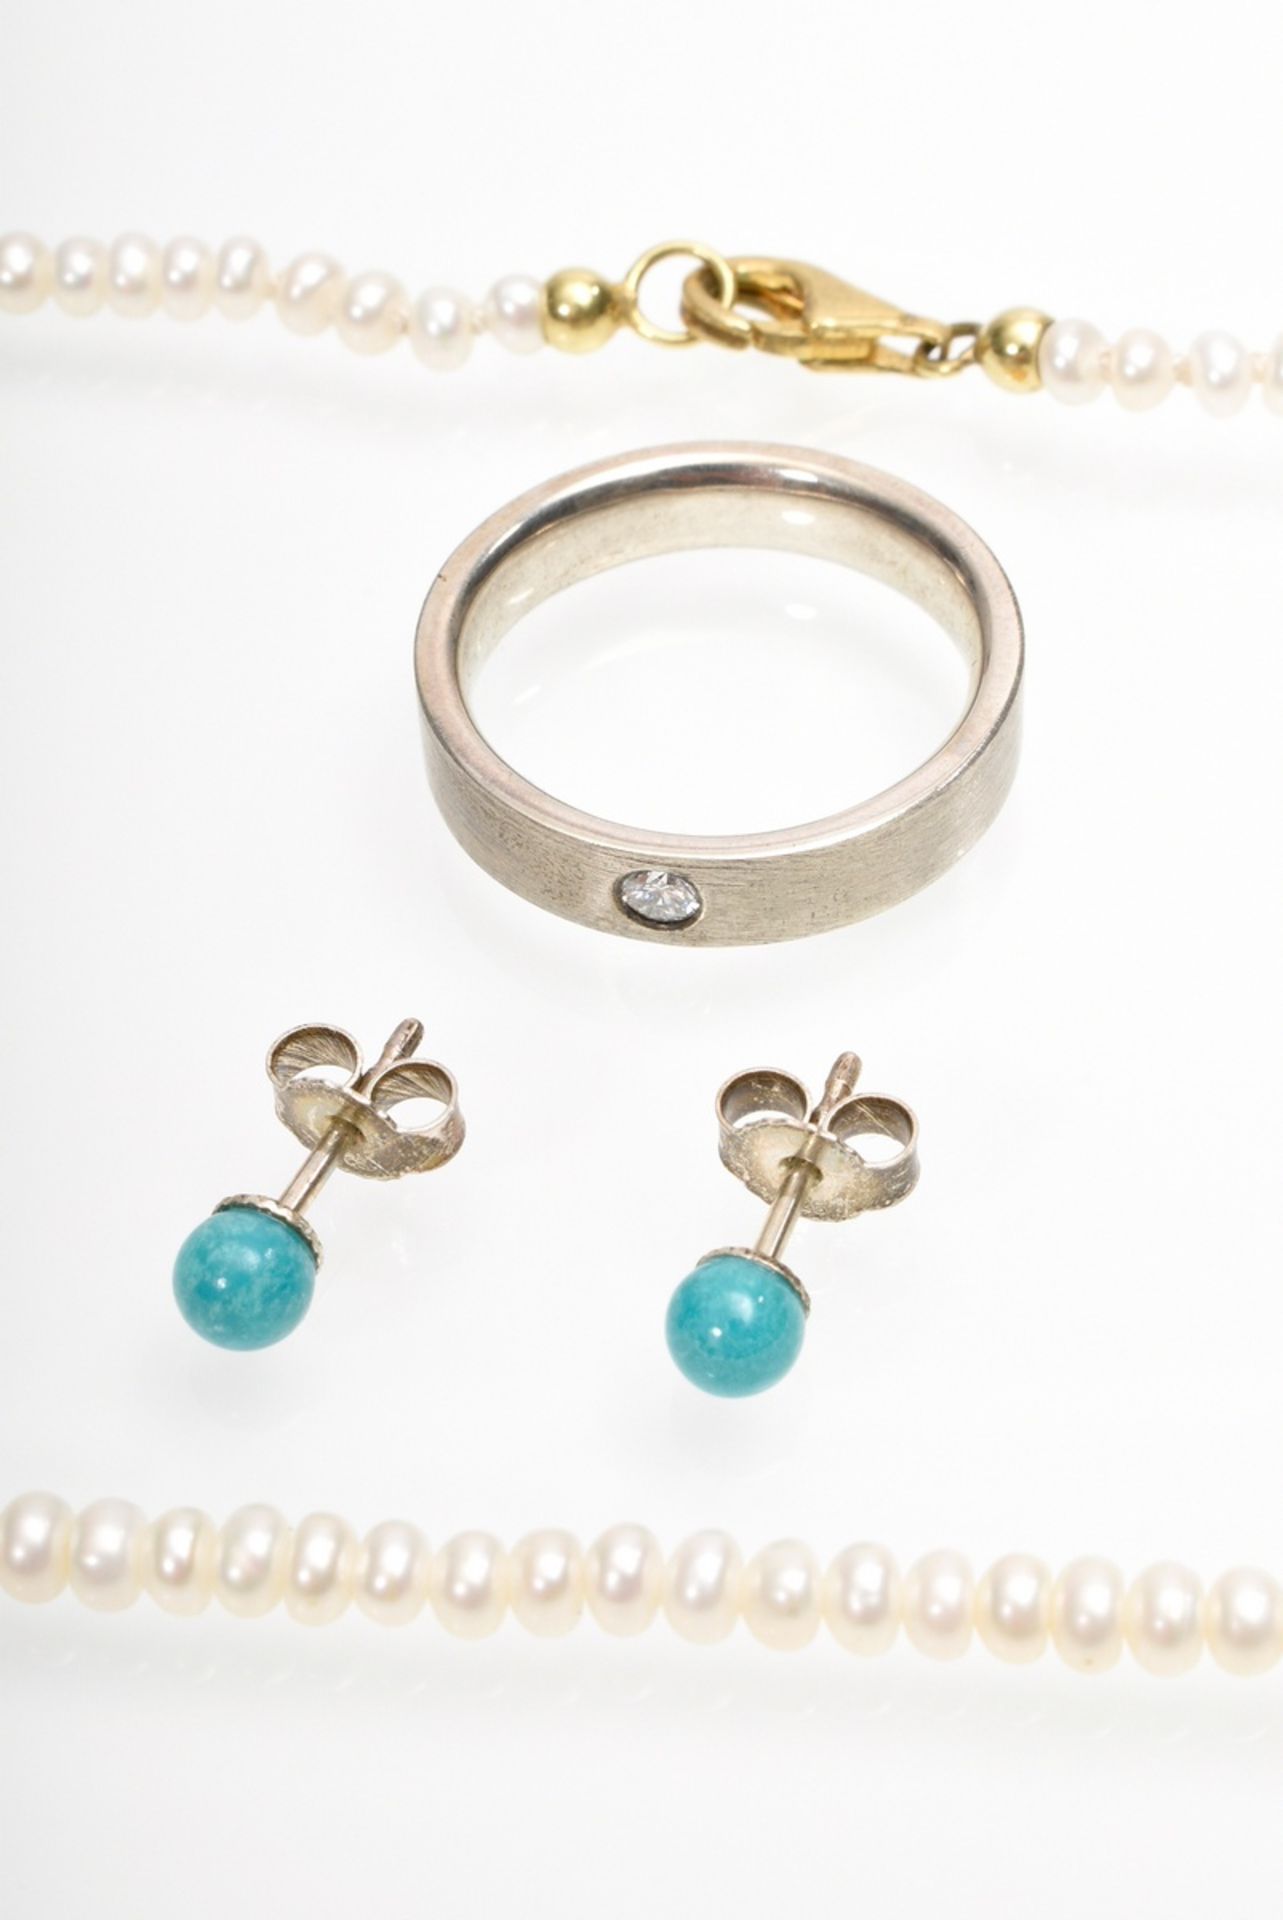 4 pieces of delicate diamond and pearl amazonite jewellery: 1x silver 925 ring with diamond (approx